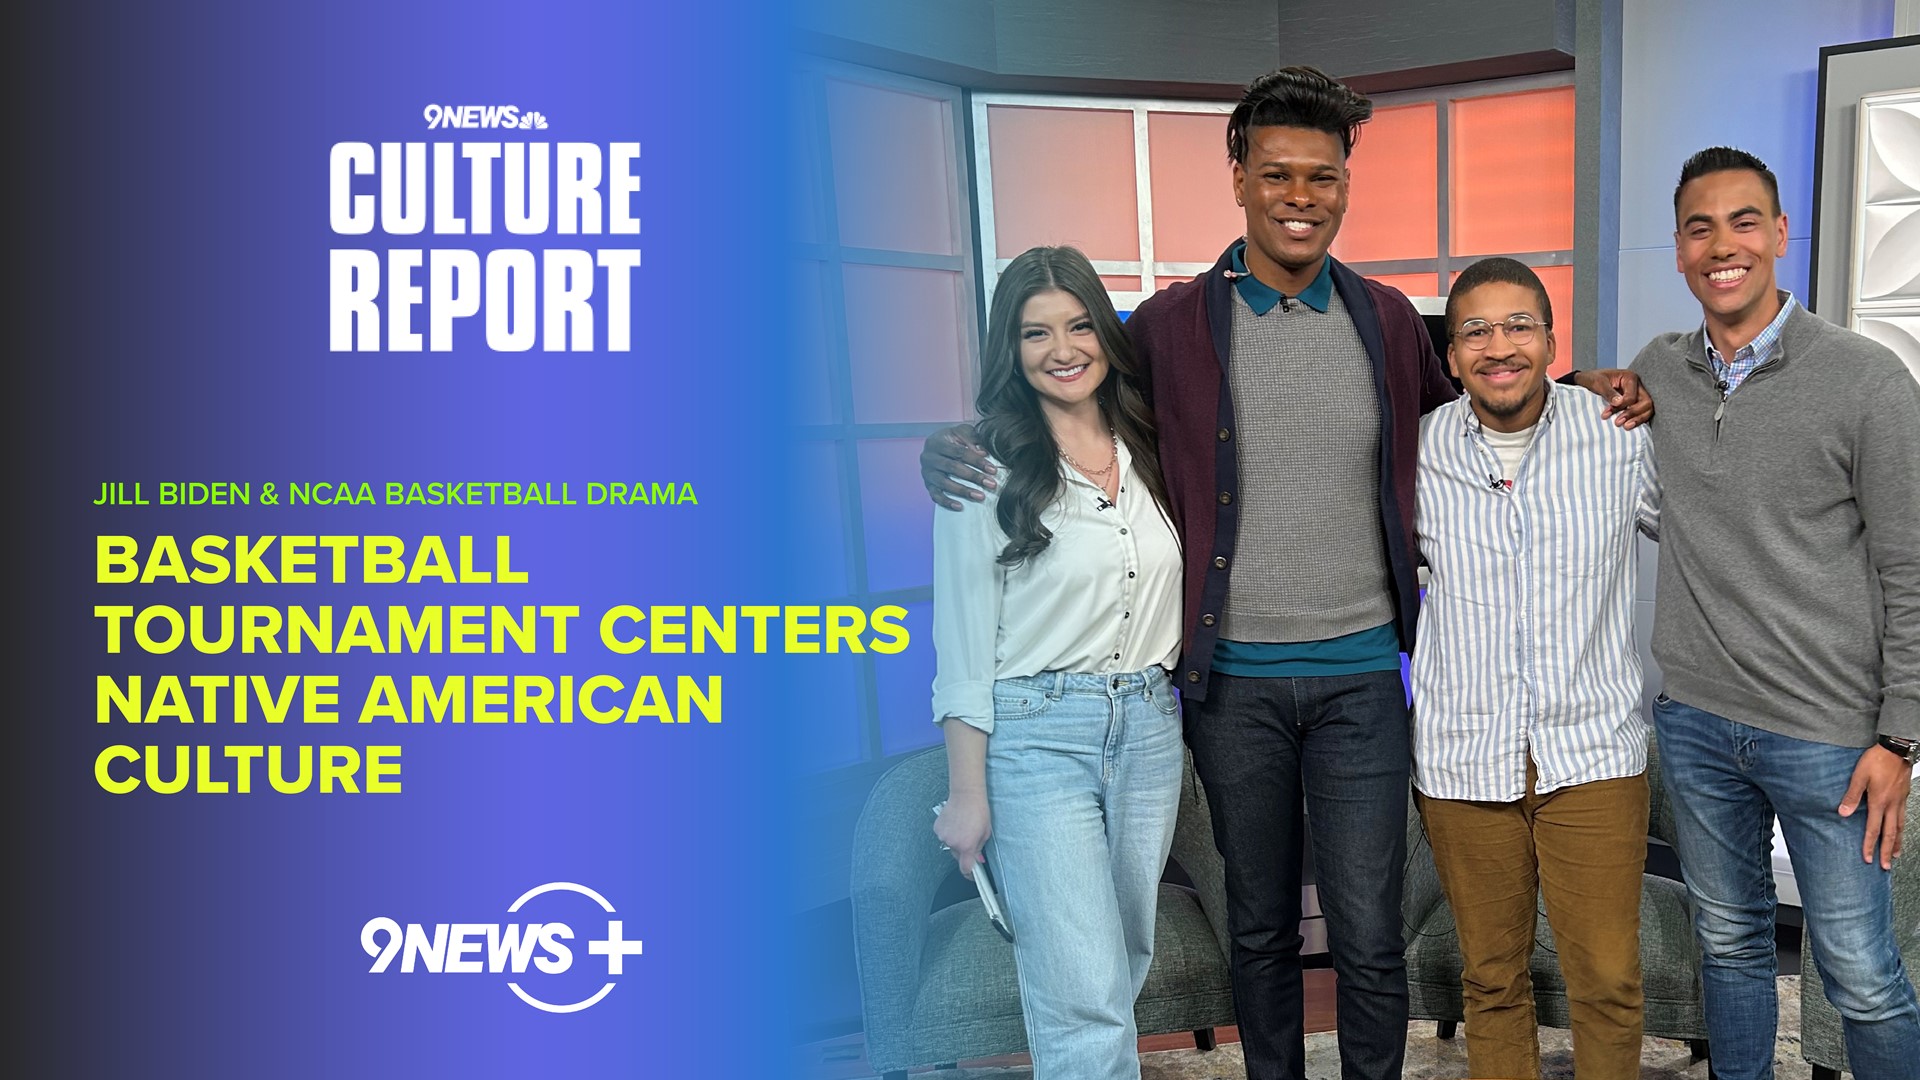 This week we discuss the drama surrounding the NCAA championship and how a basketball tournament brings indigenous communities from across the country together.